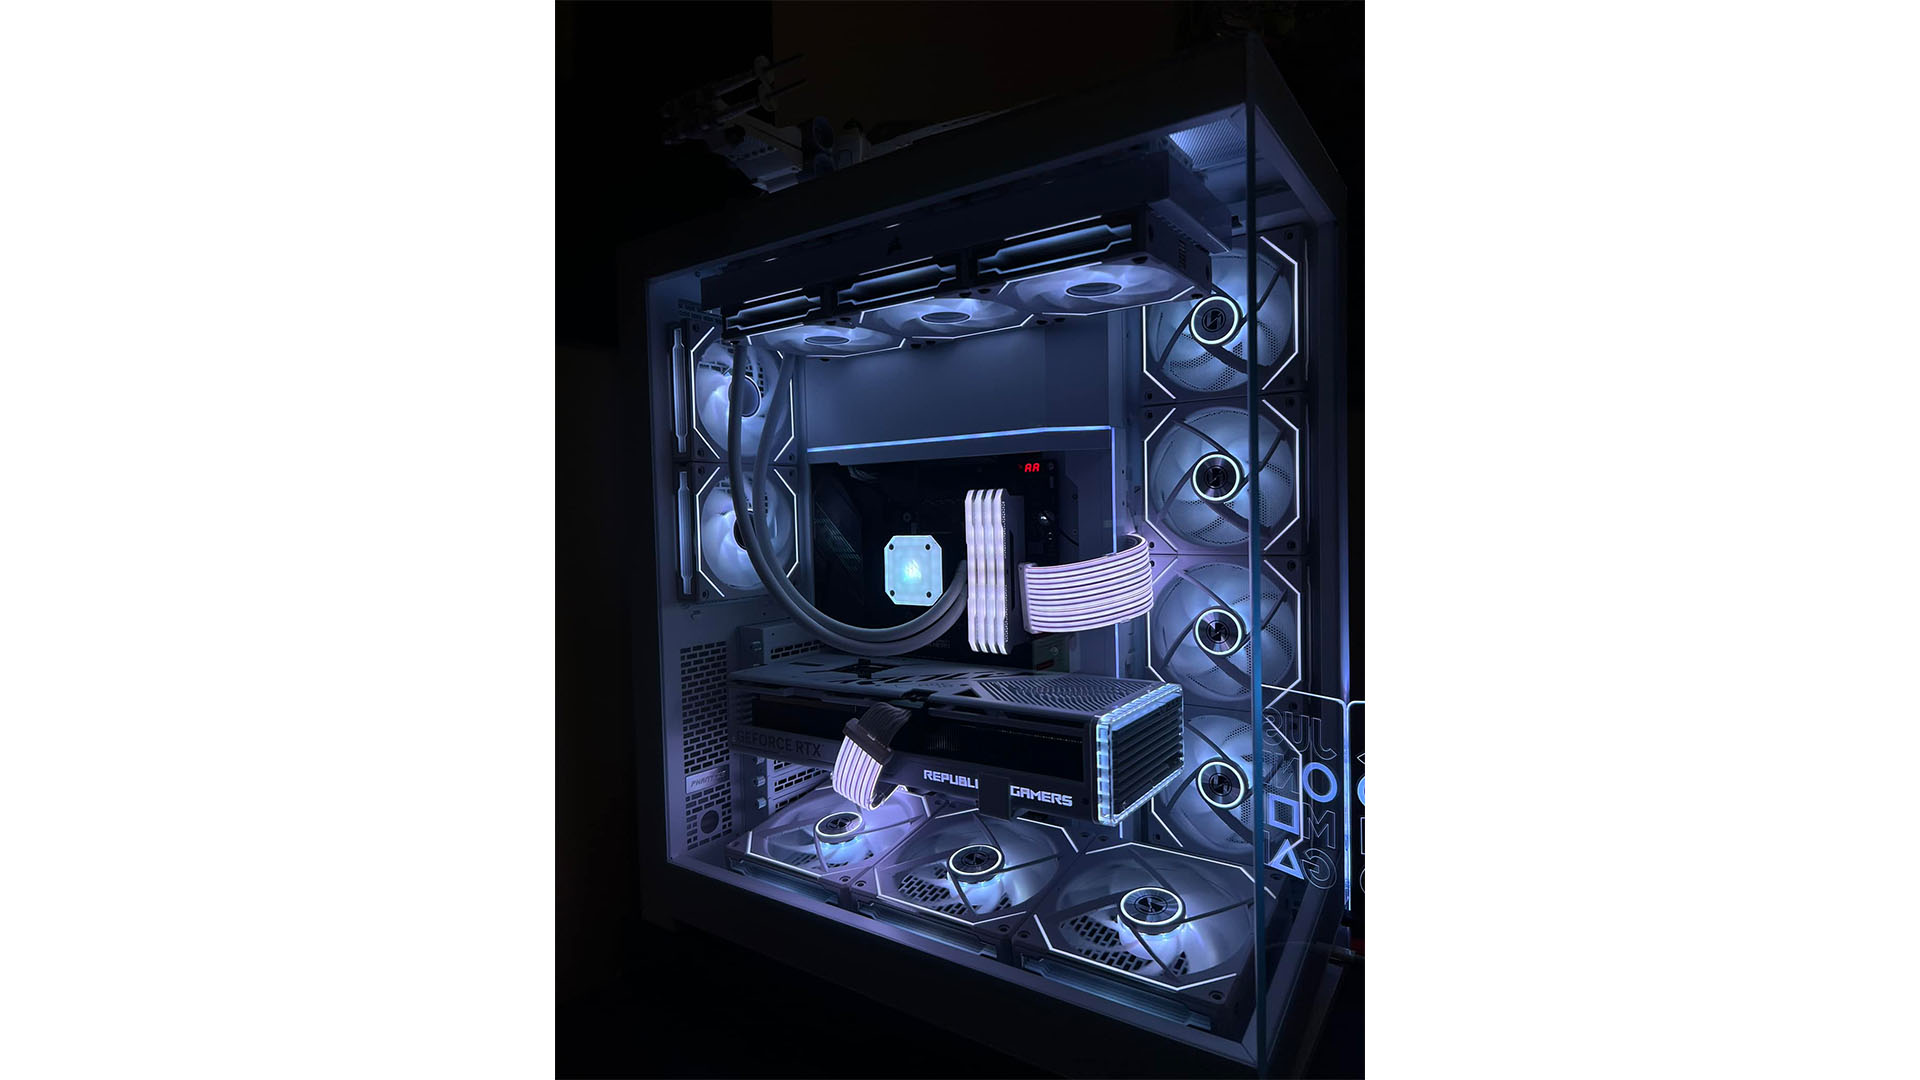 This computer case is TOO GOOD - Phanteks NV7 Case 